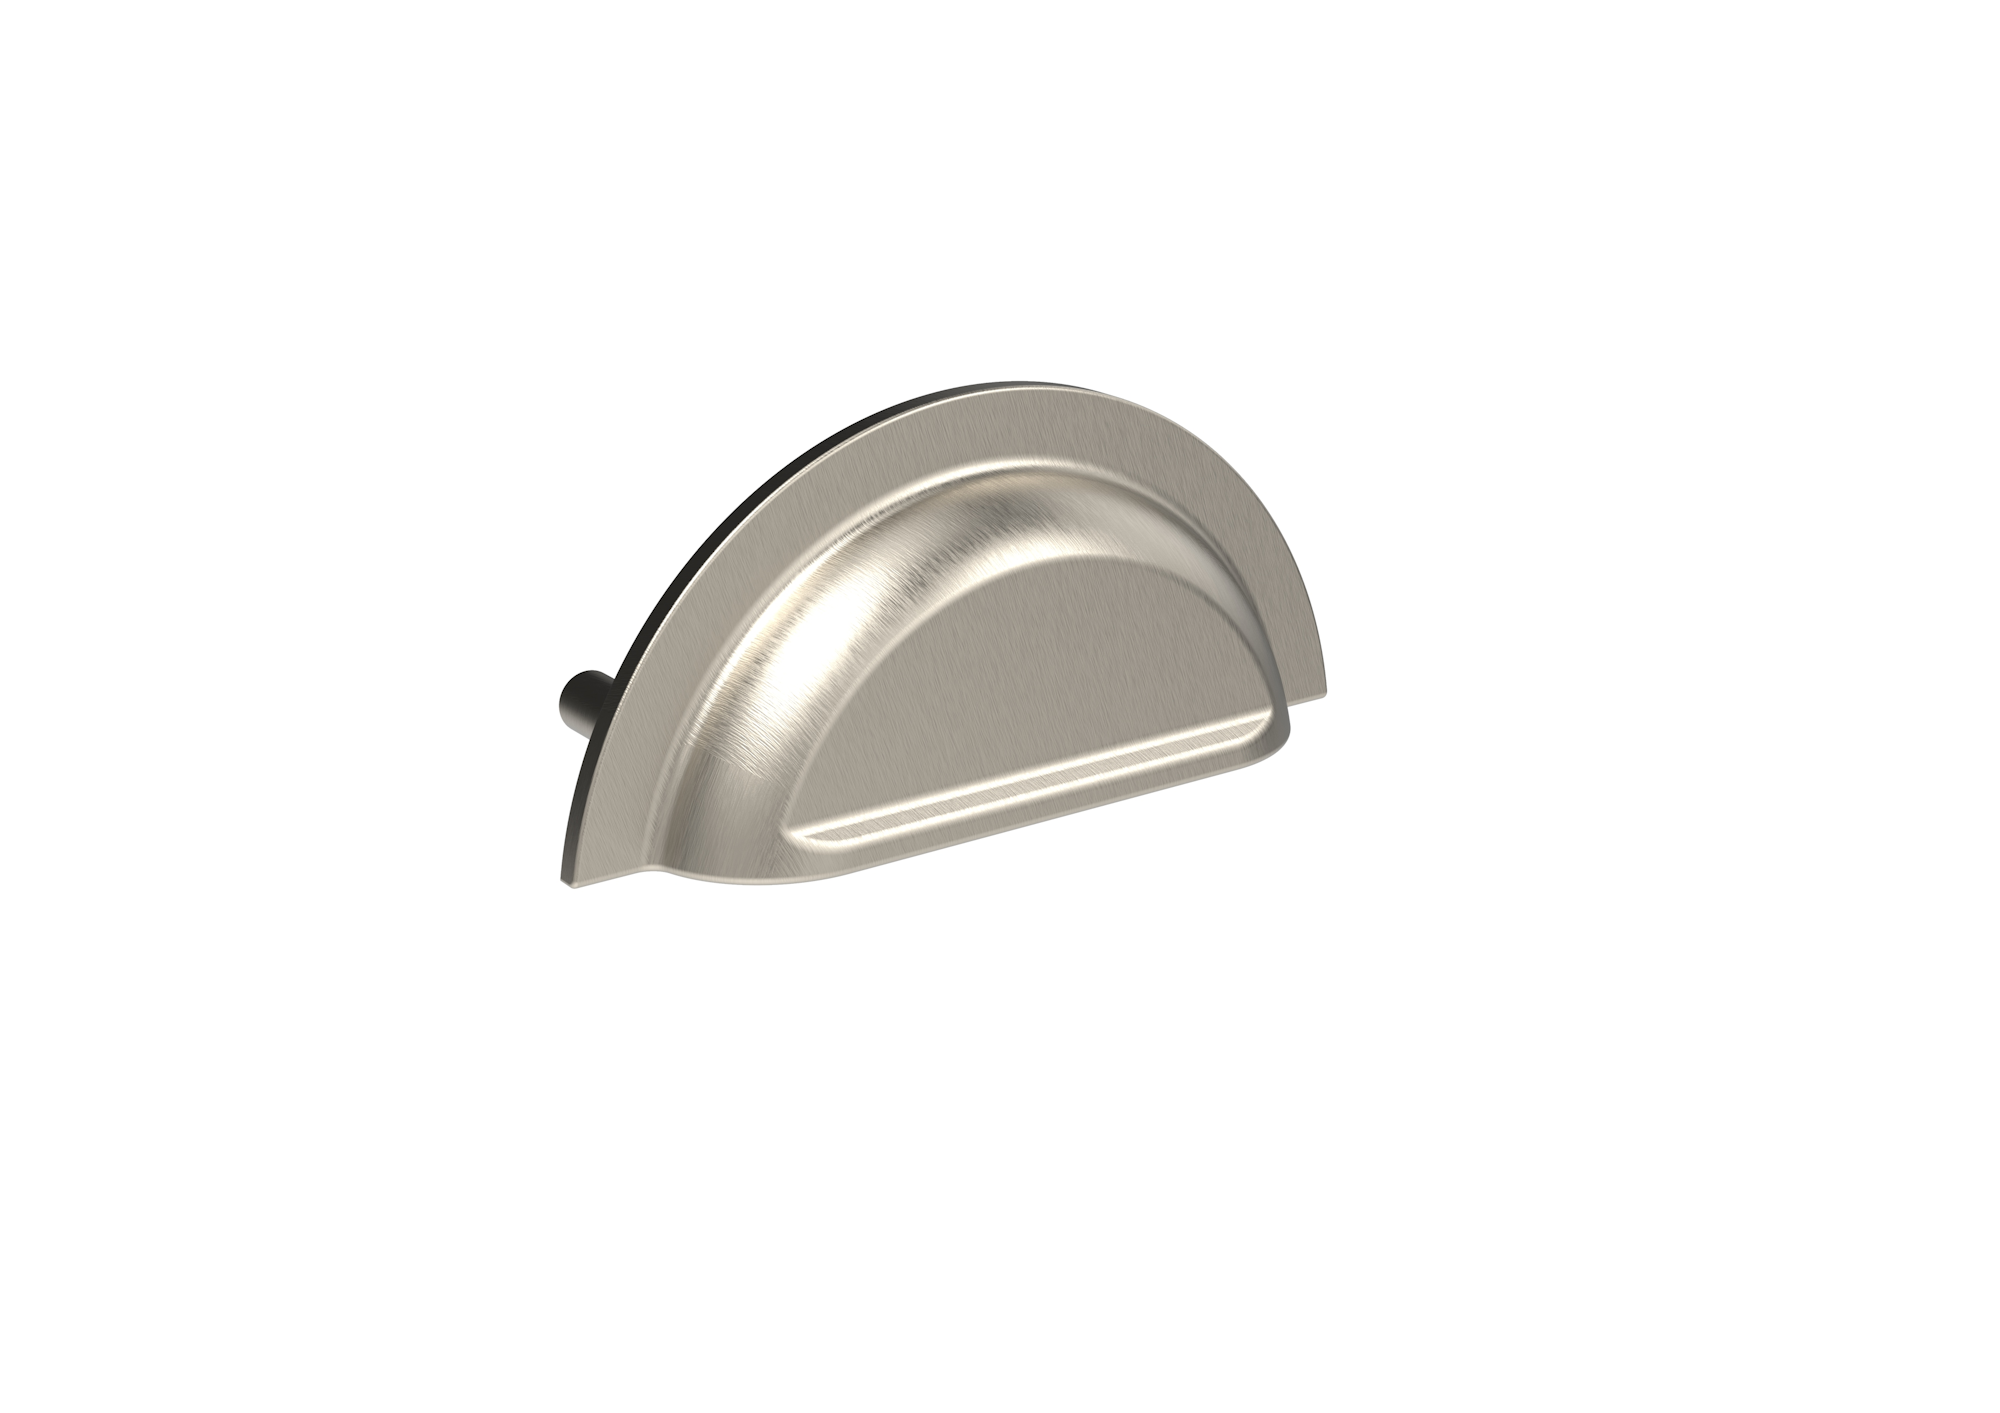 RUSE 91mm cup handle - Brushed Nickel - 75mm Centres